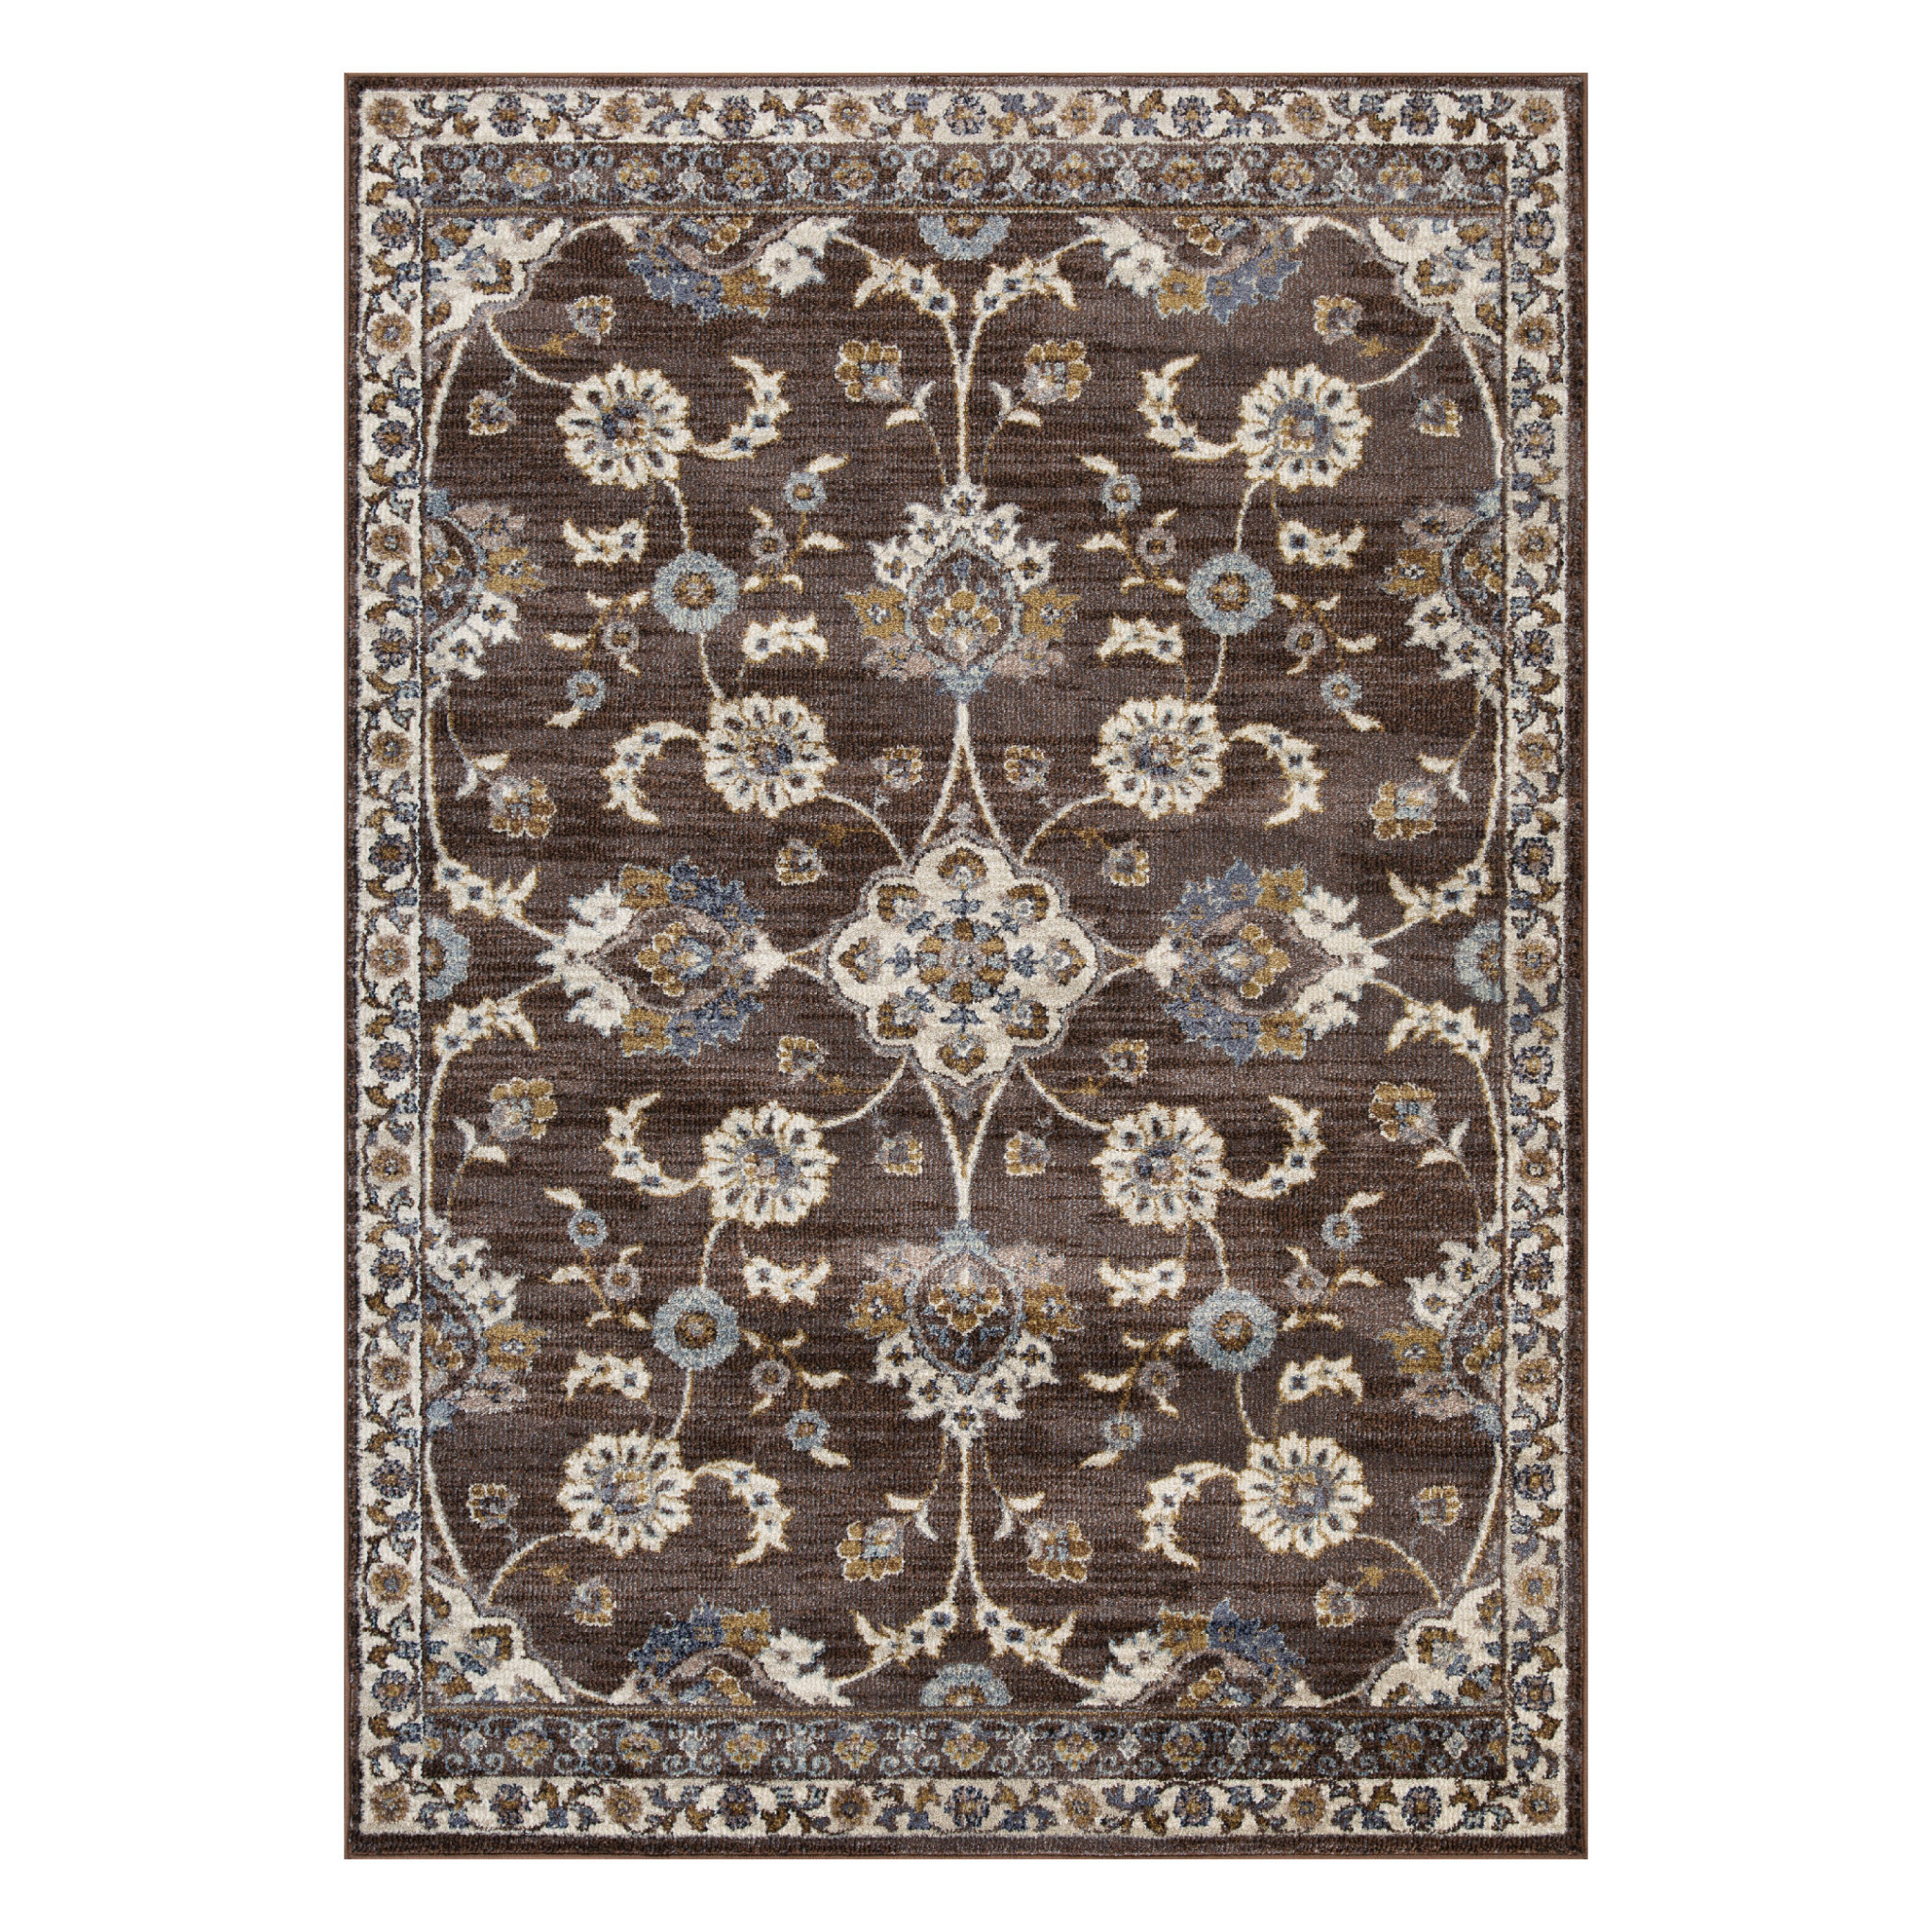 8' x 10' Brown Floral Power Loom Area Rug With Fringe-532151-1